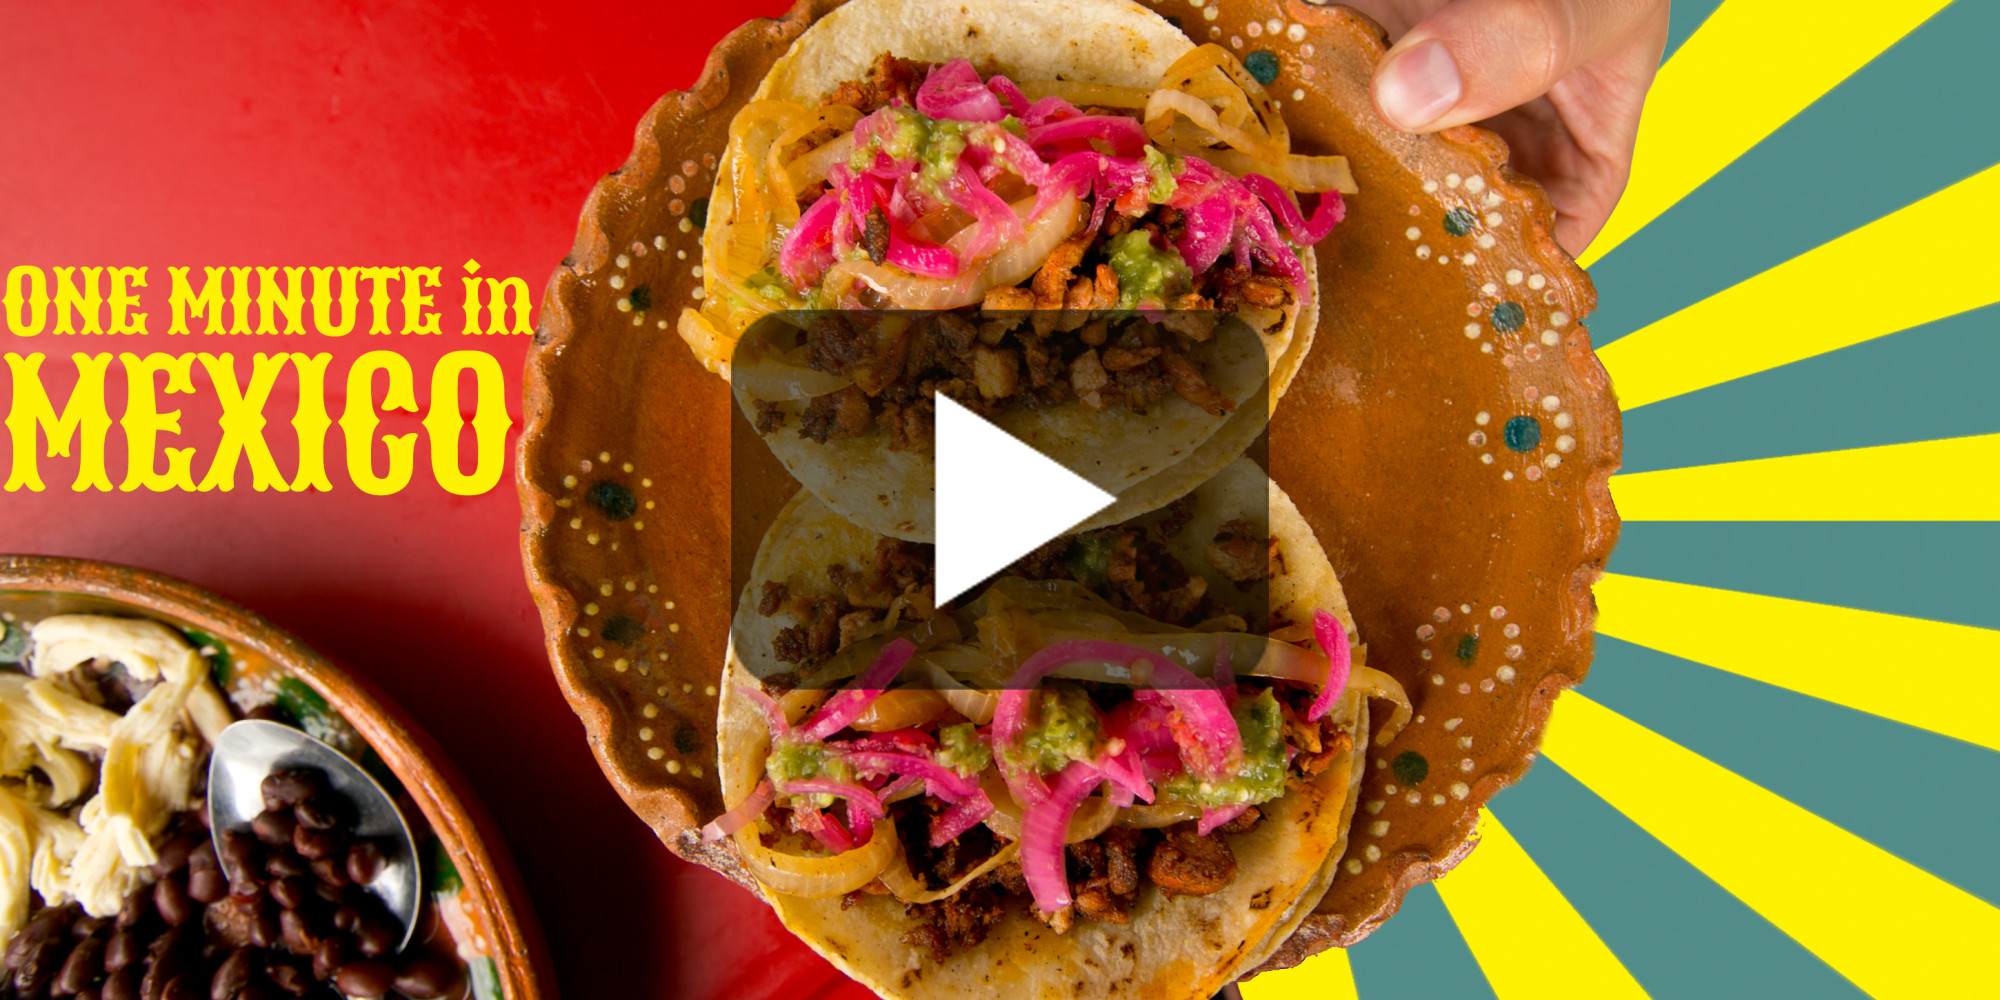 WATCH: The Best of Mexican Food In One Minute